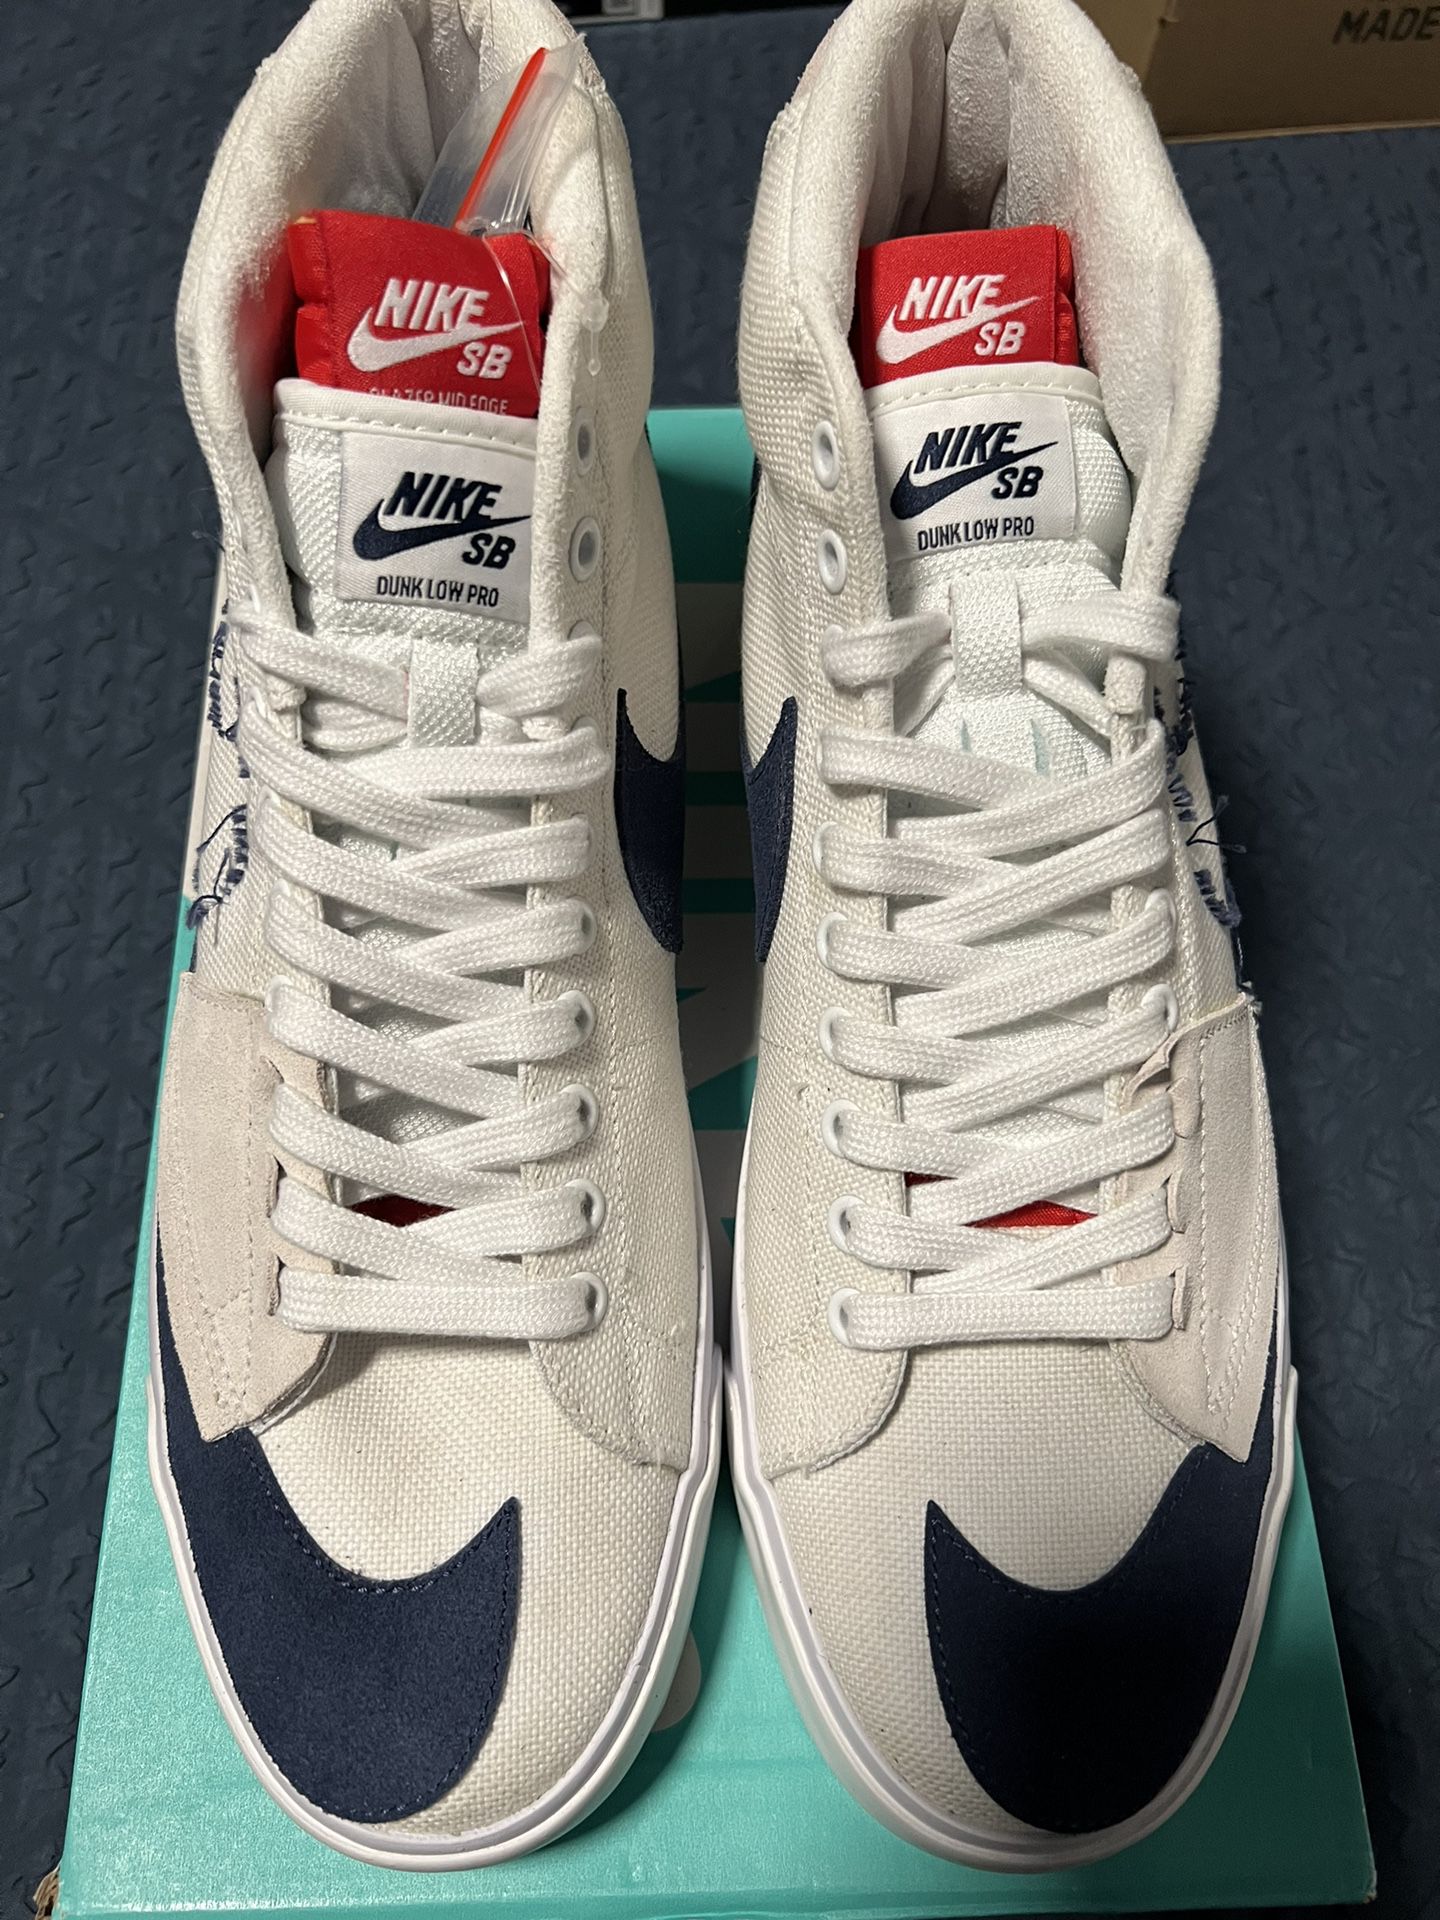 Nike Sb Blazer Hack Pack for Sale in Yonkers, NY -